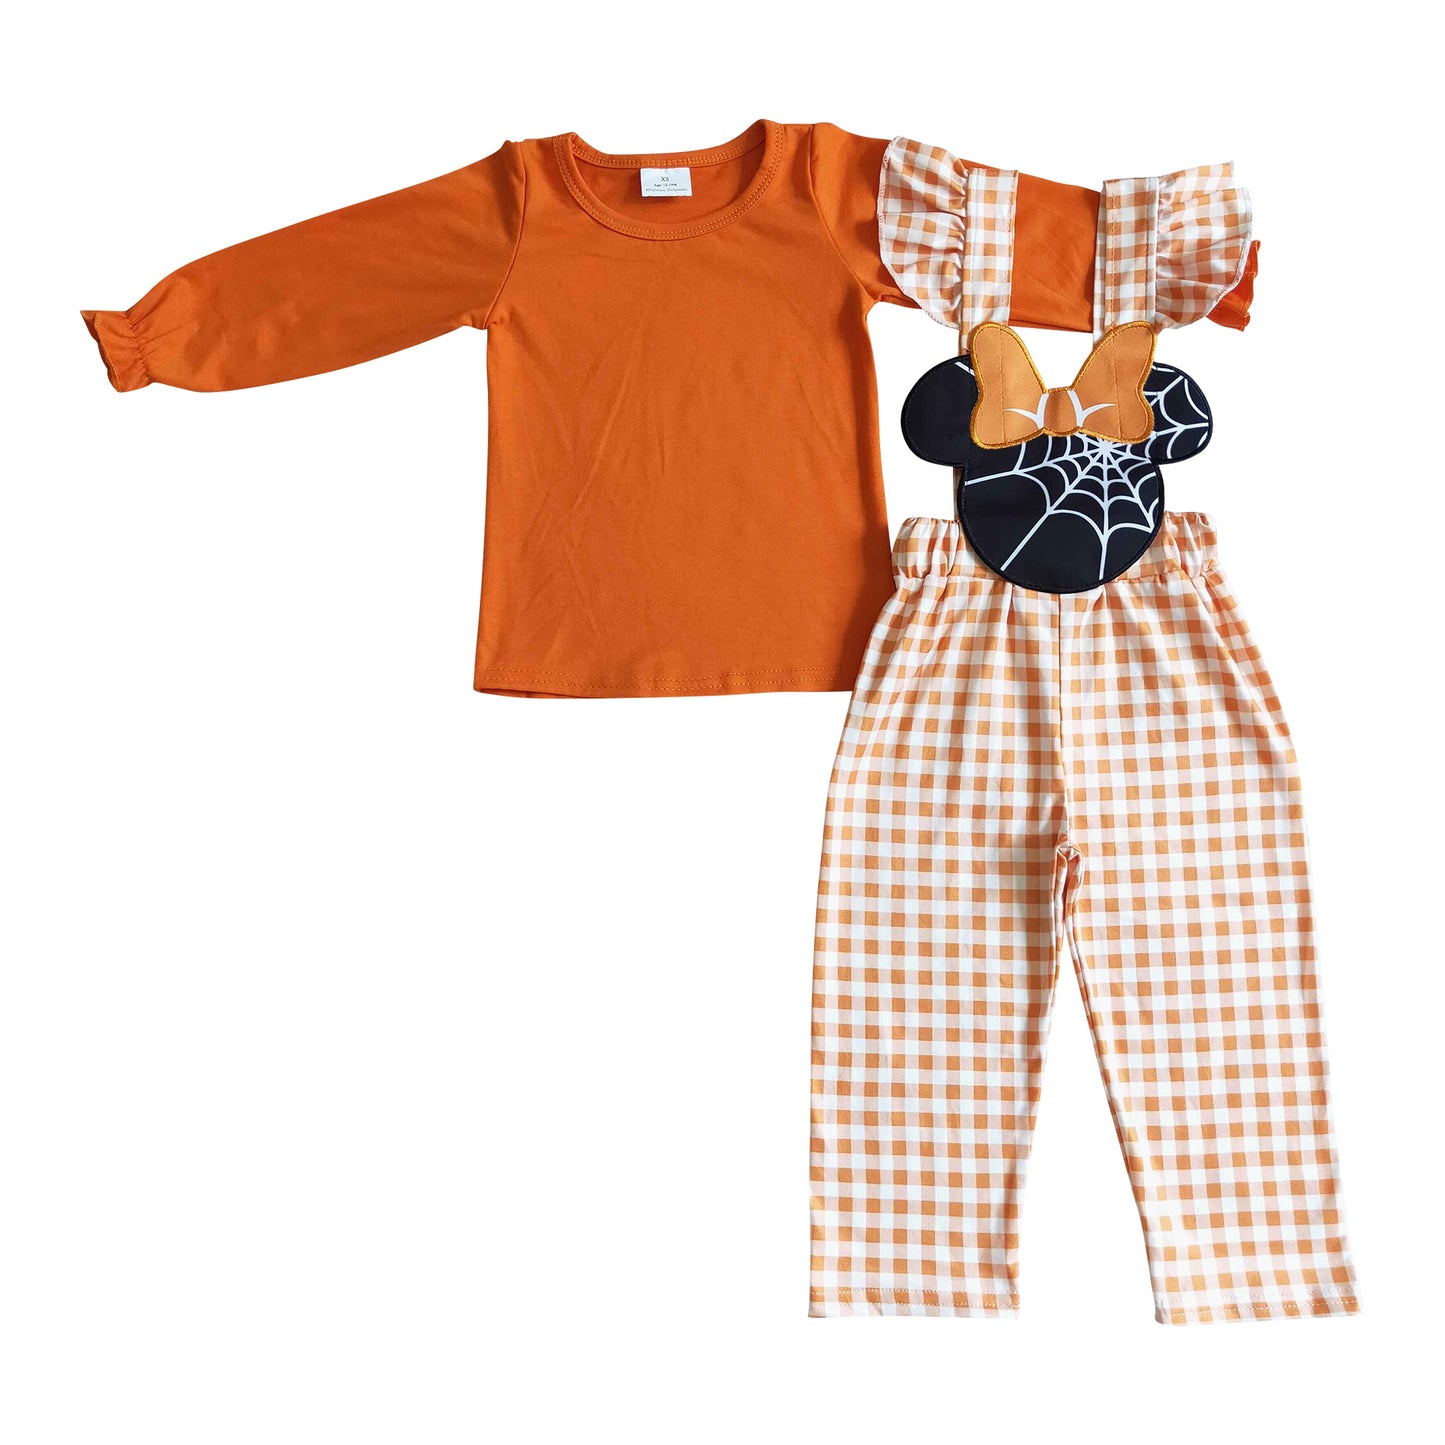 kids clothing orange plaid overal outfit for halloween